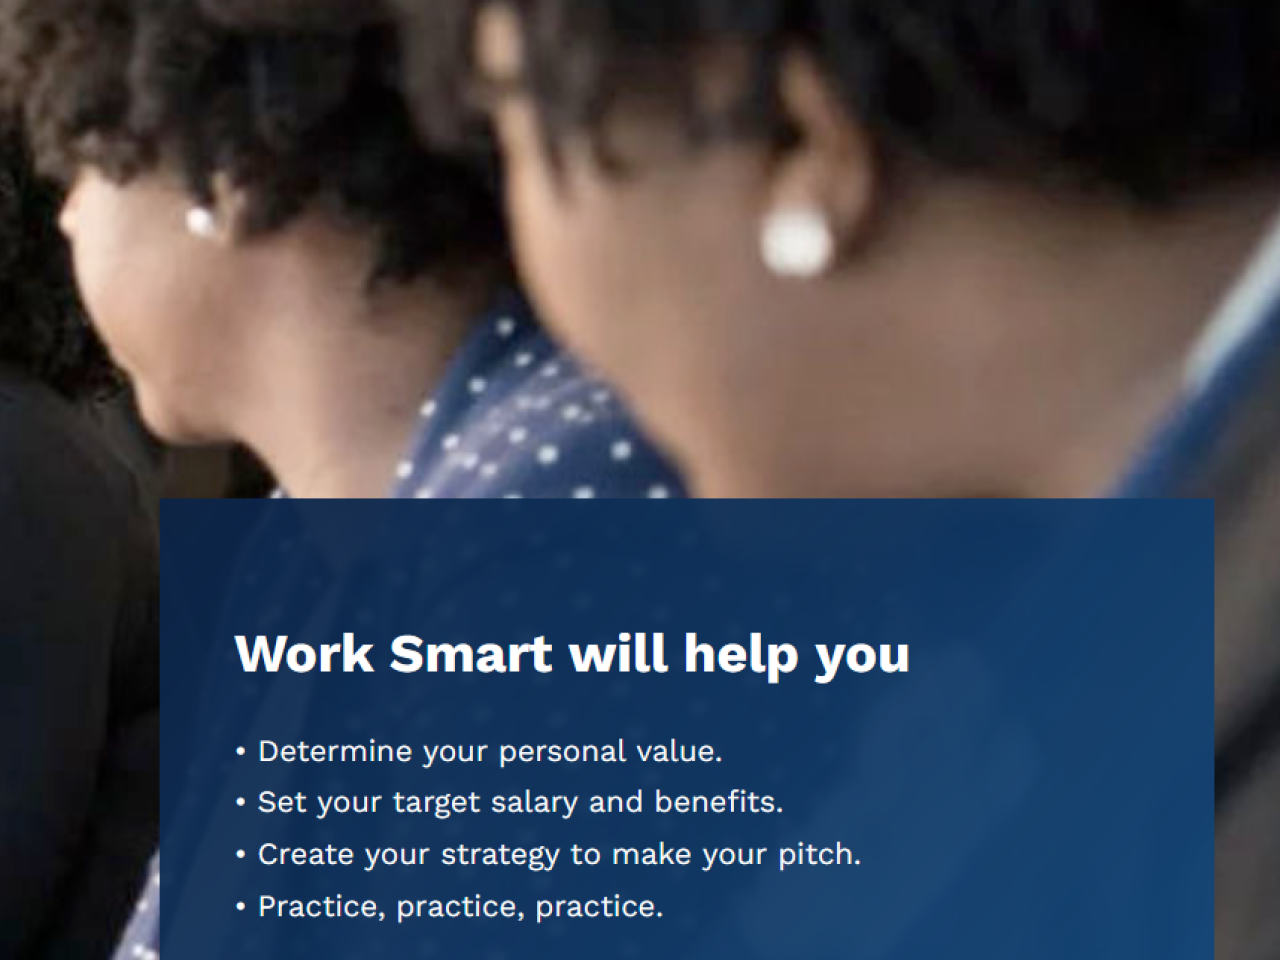 Three women sitting down looking off in the distance with the text "Work Smart will help you determine your personal value, set your target salary and benefits, create your strategy to make your pitch, and practice, practice, practice". 